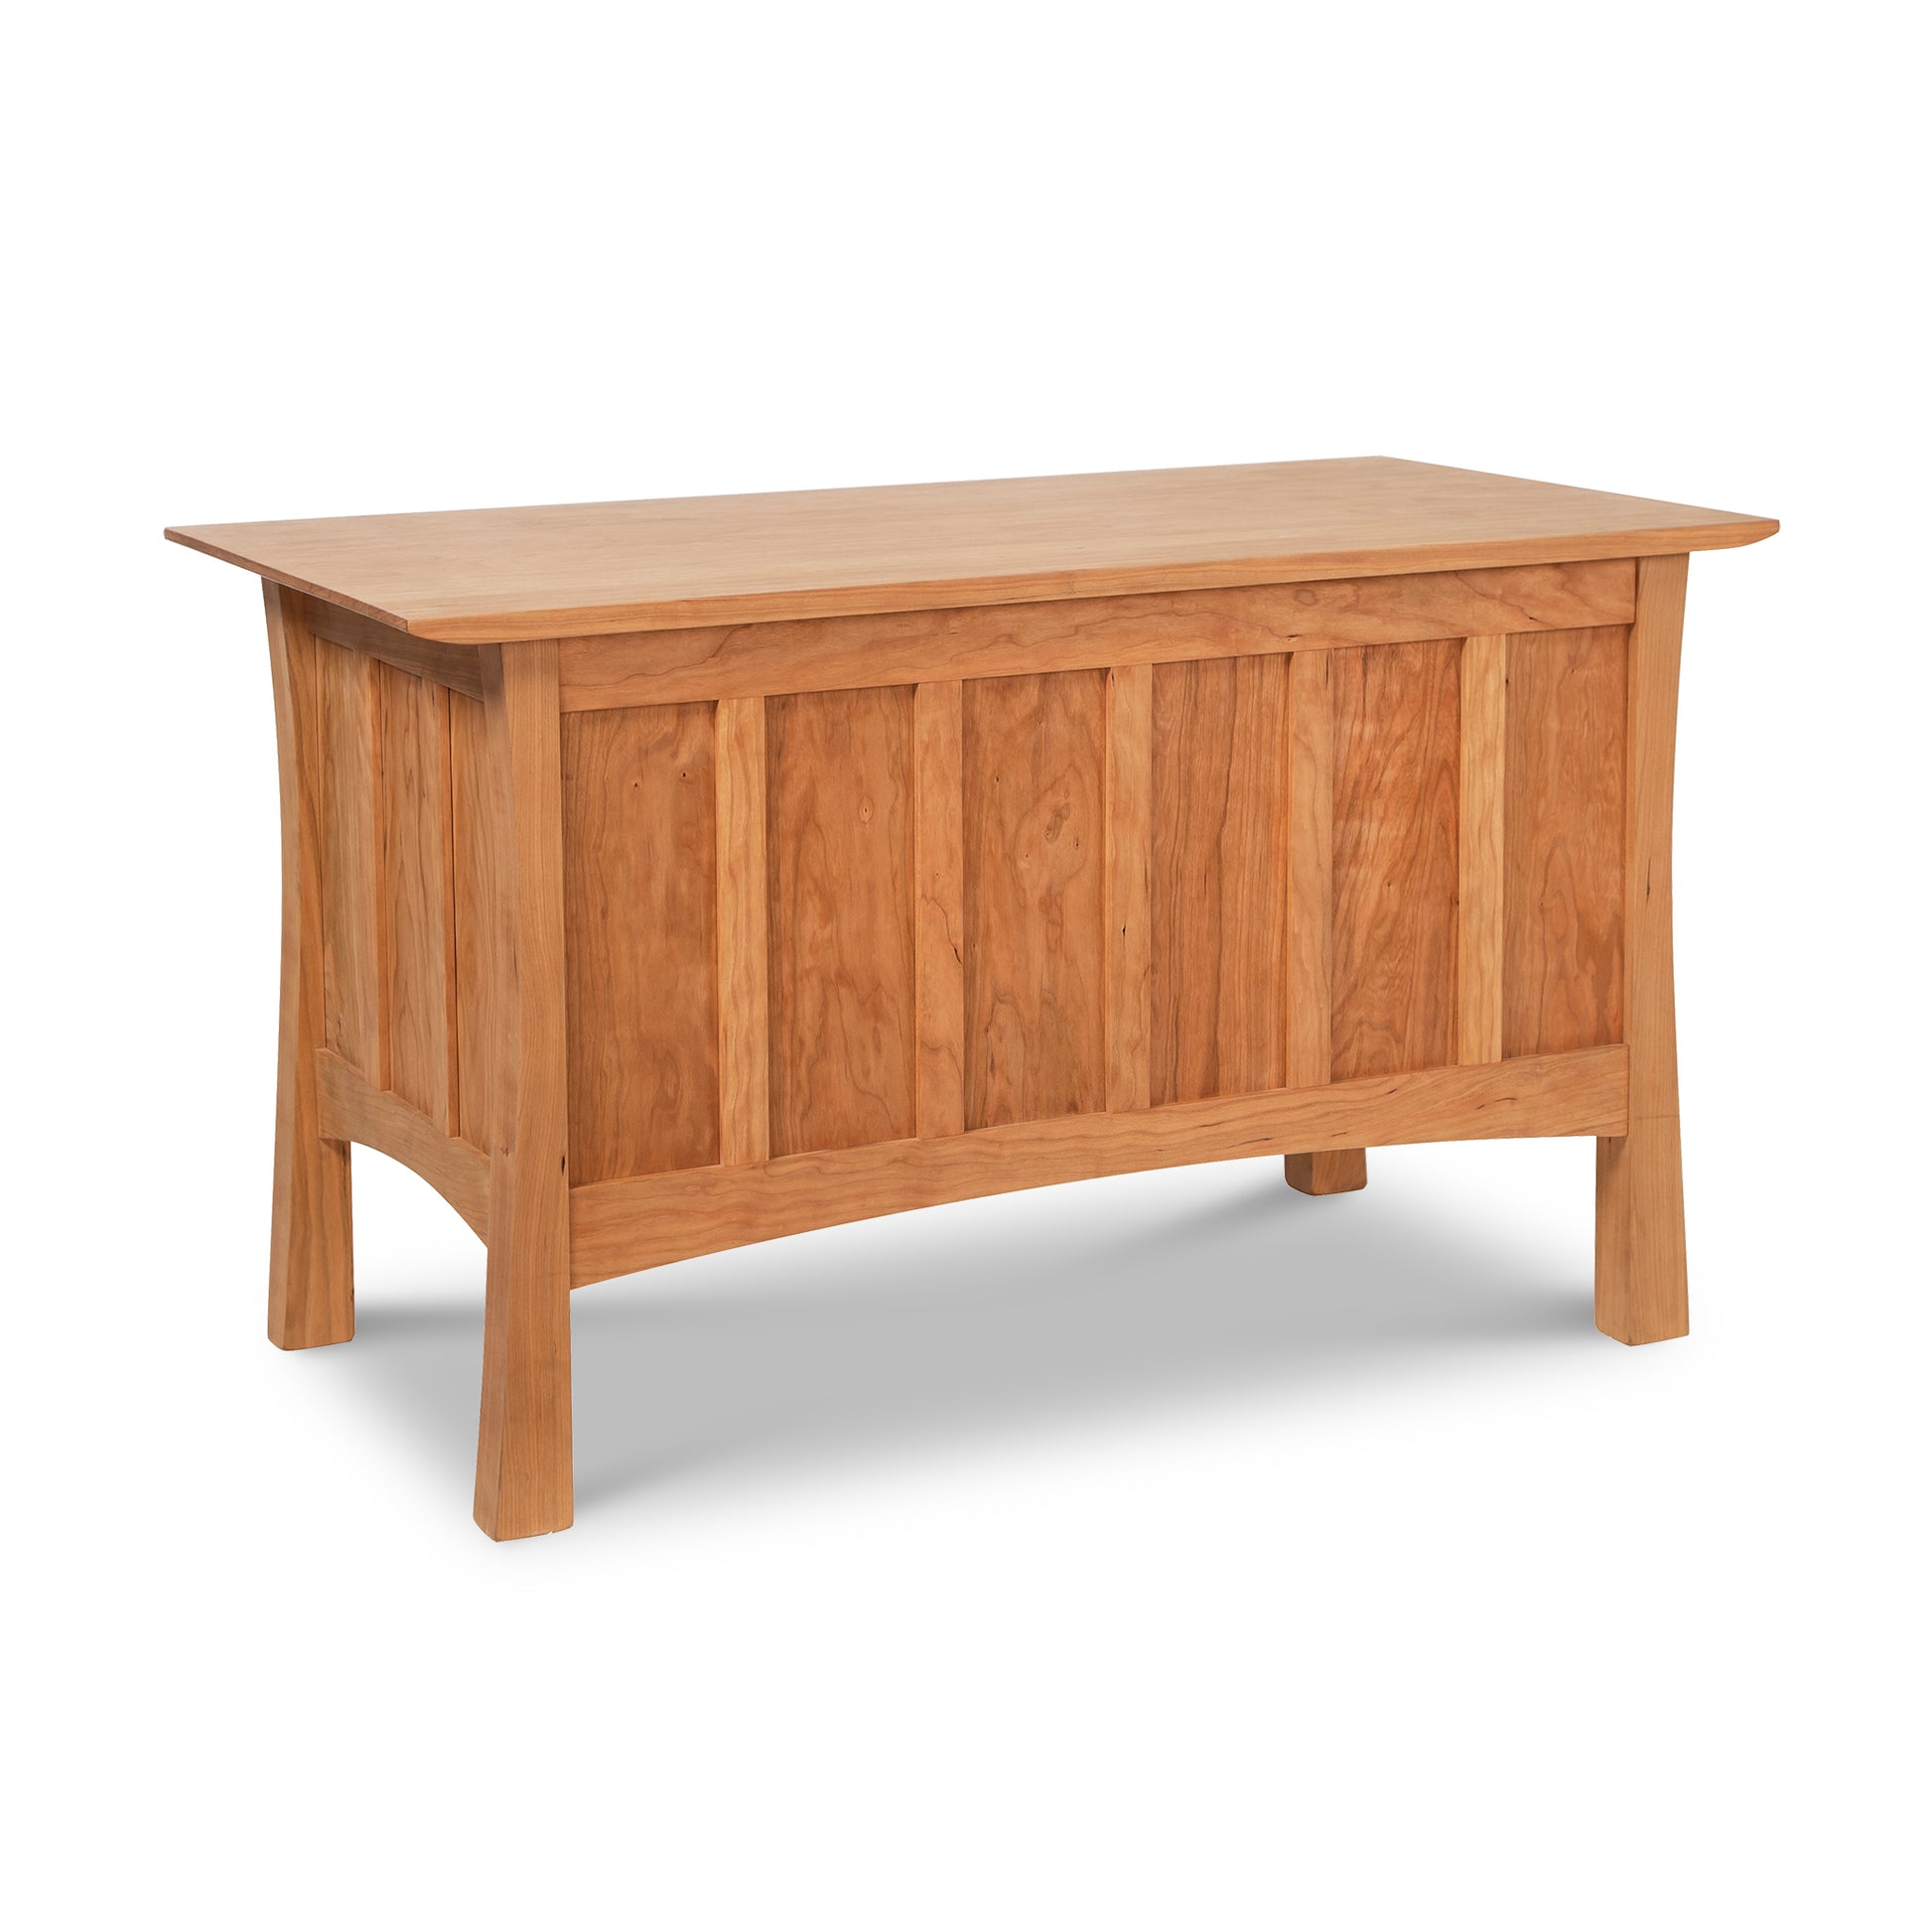 Vermont Furniture Designs Contemporary Craftsman solid wood blanket chest with a hinged top and paneled sides on a white background.